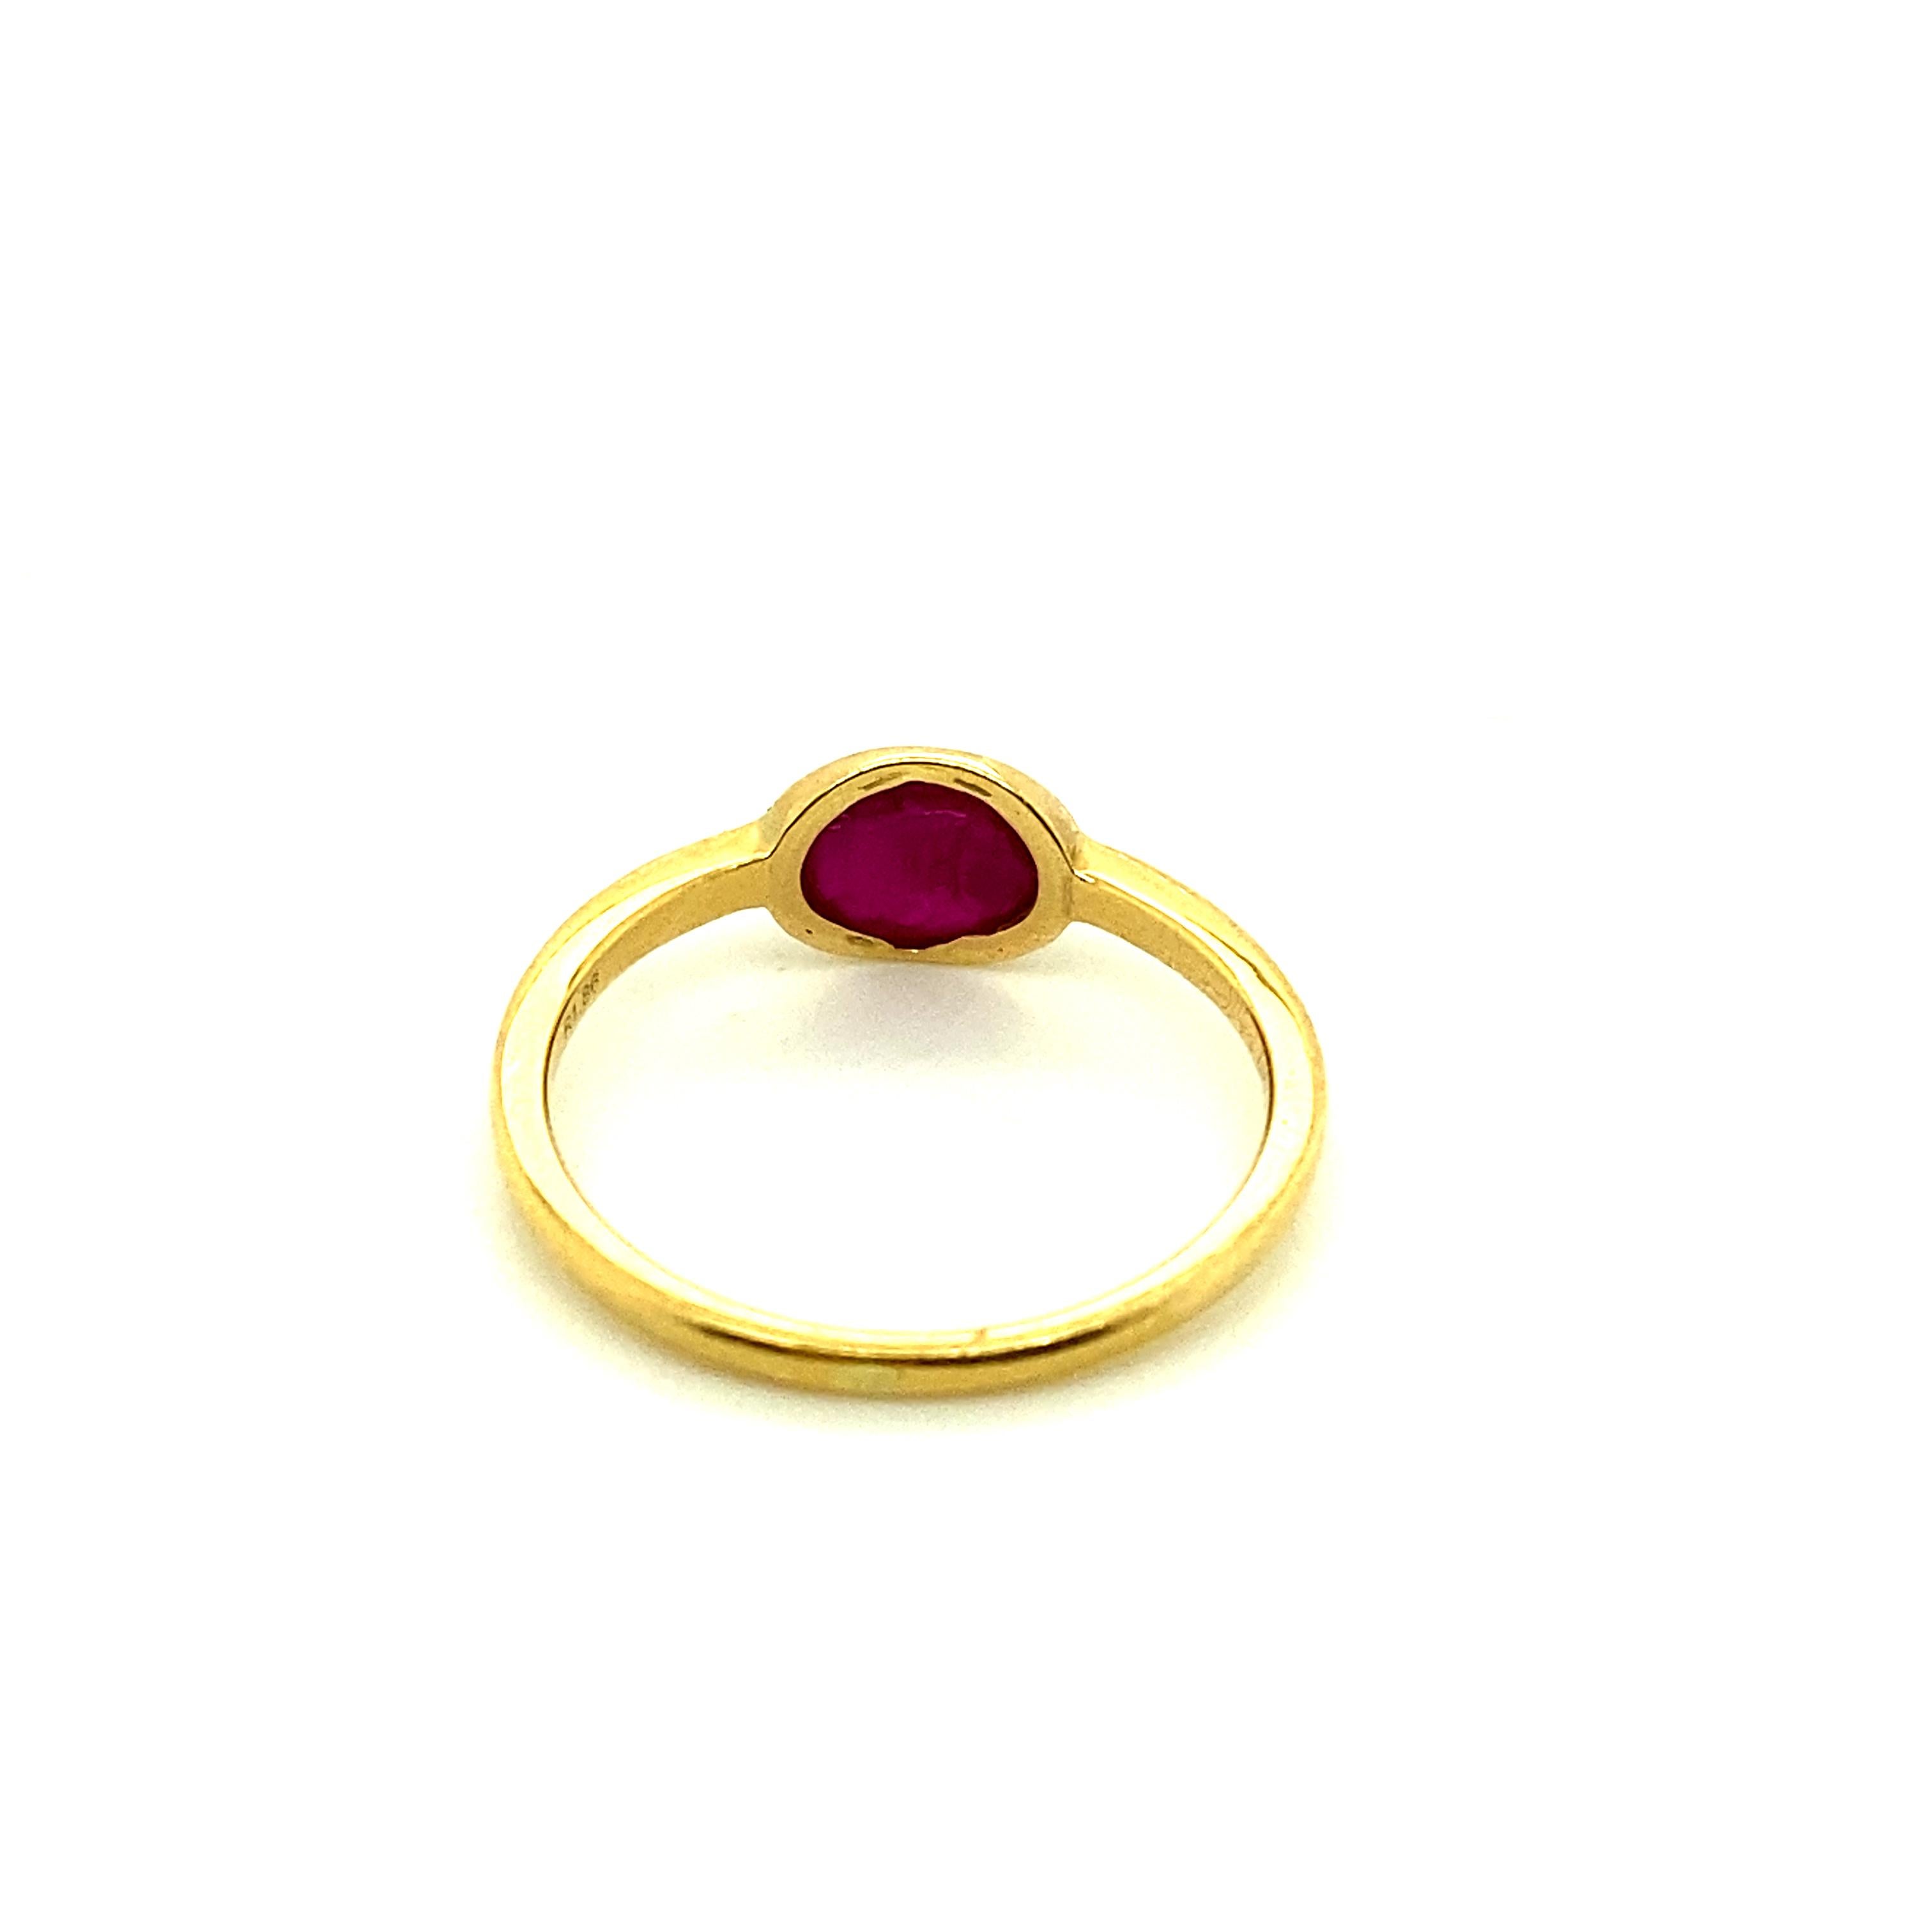 Cabochon 1.86 Carat Unheated Burmese Star Ruby Yellow Gold Engagement Ring